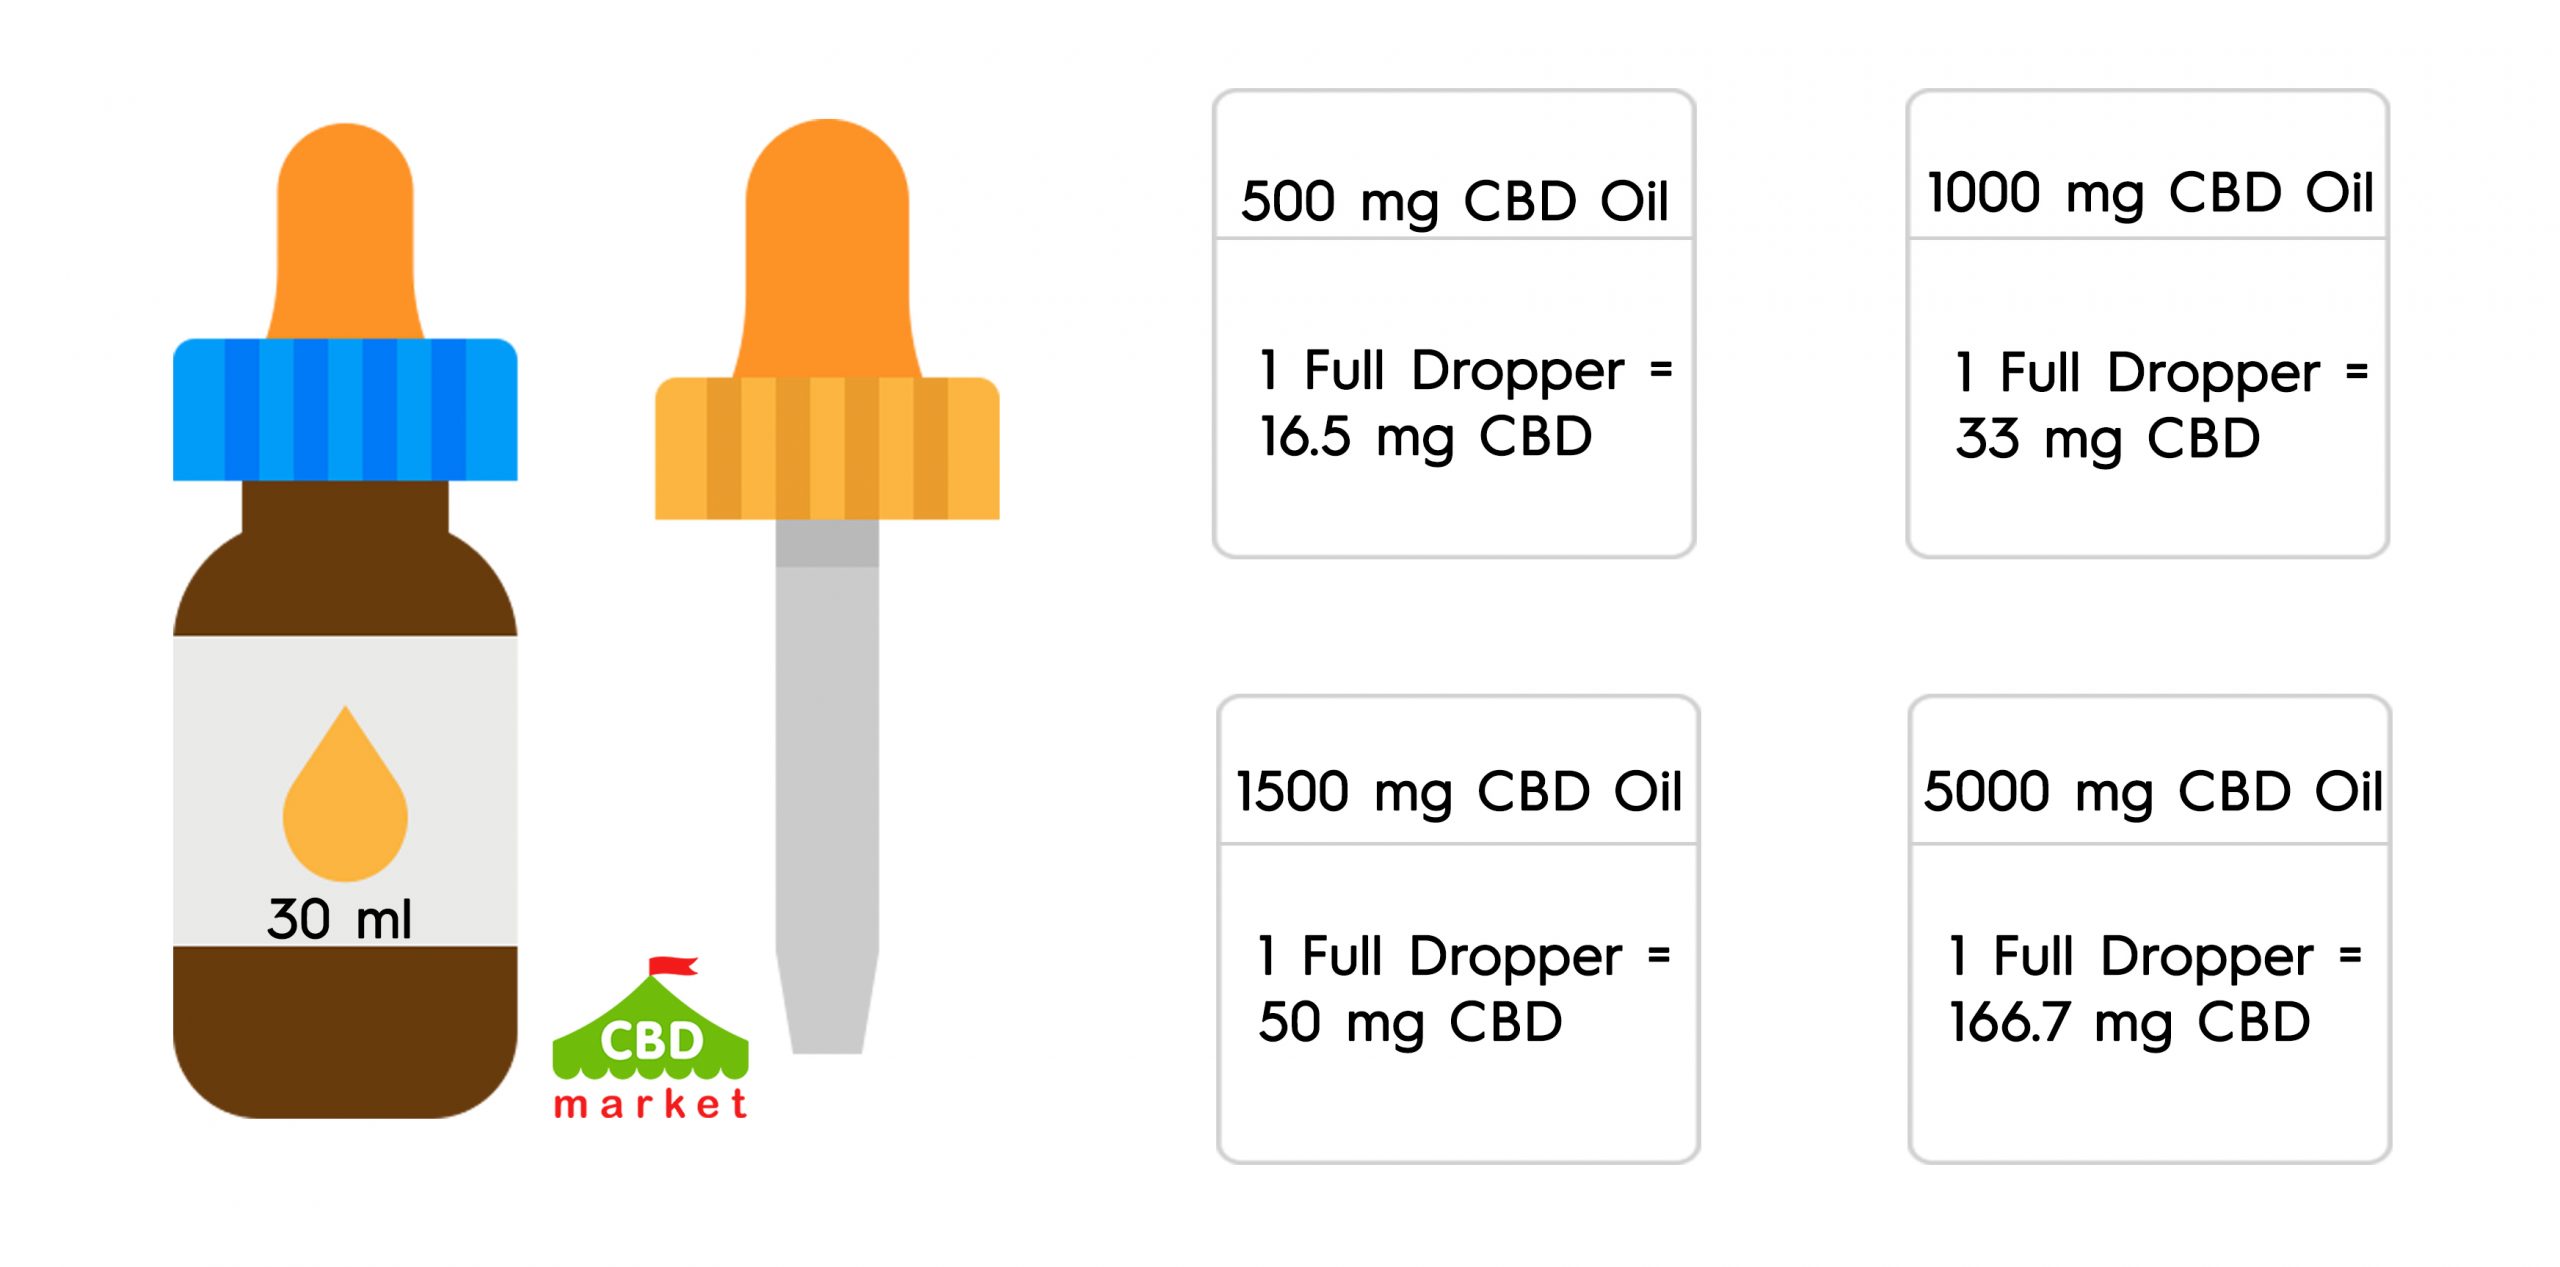 CBD dosage in one full dropper of the 30-ml bottles with different CBD concentrations: 500 mg, 1000 mg, 1500 mg and 5000 mg of CBD